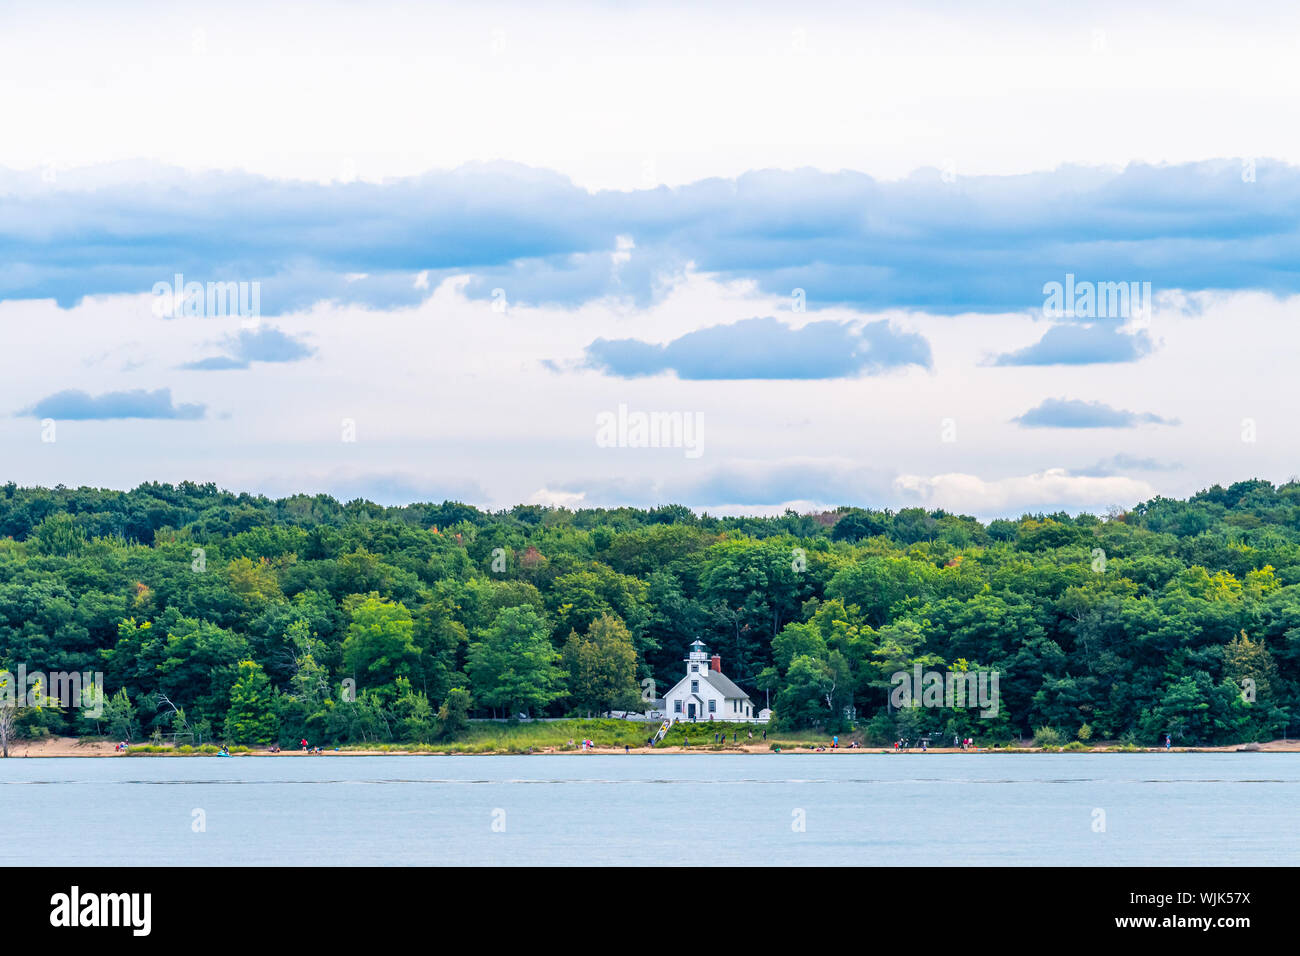 People walk on the beach in front of the Old Mission Point Lighthouse on Old Mission Peninsula near Traverse City, Michigan, as viewed from the water. Stock Photo